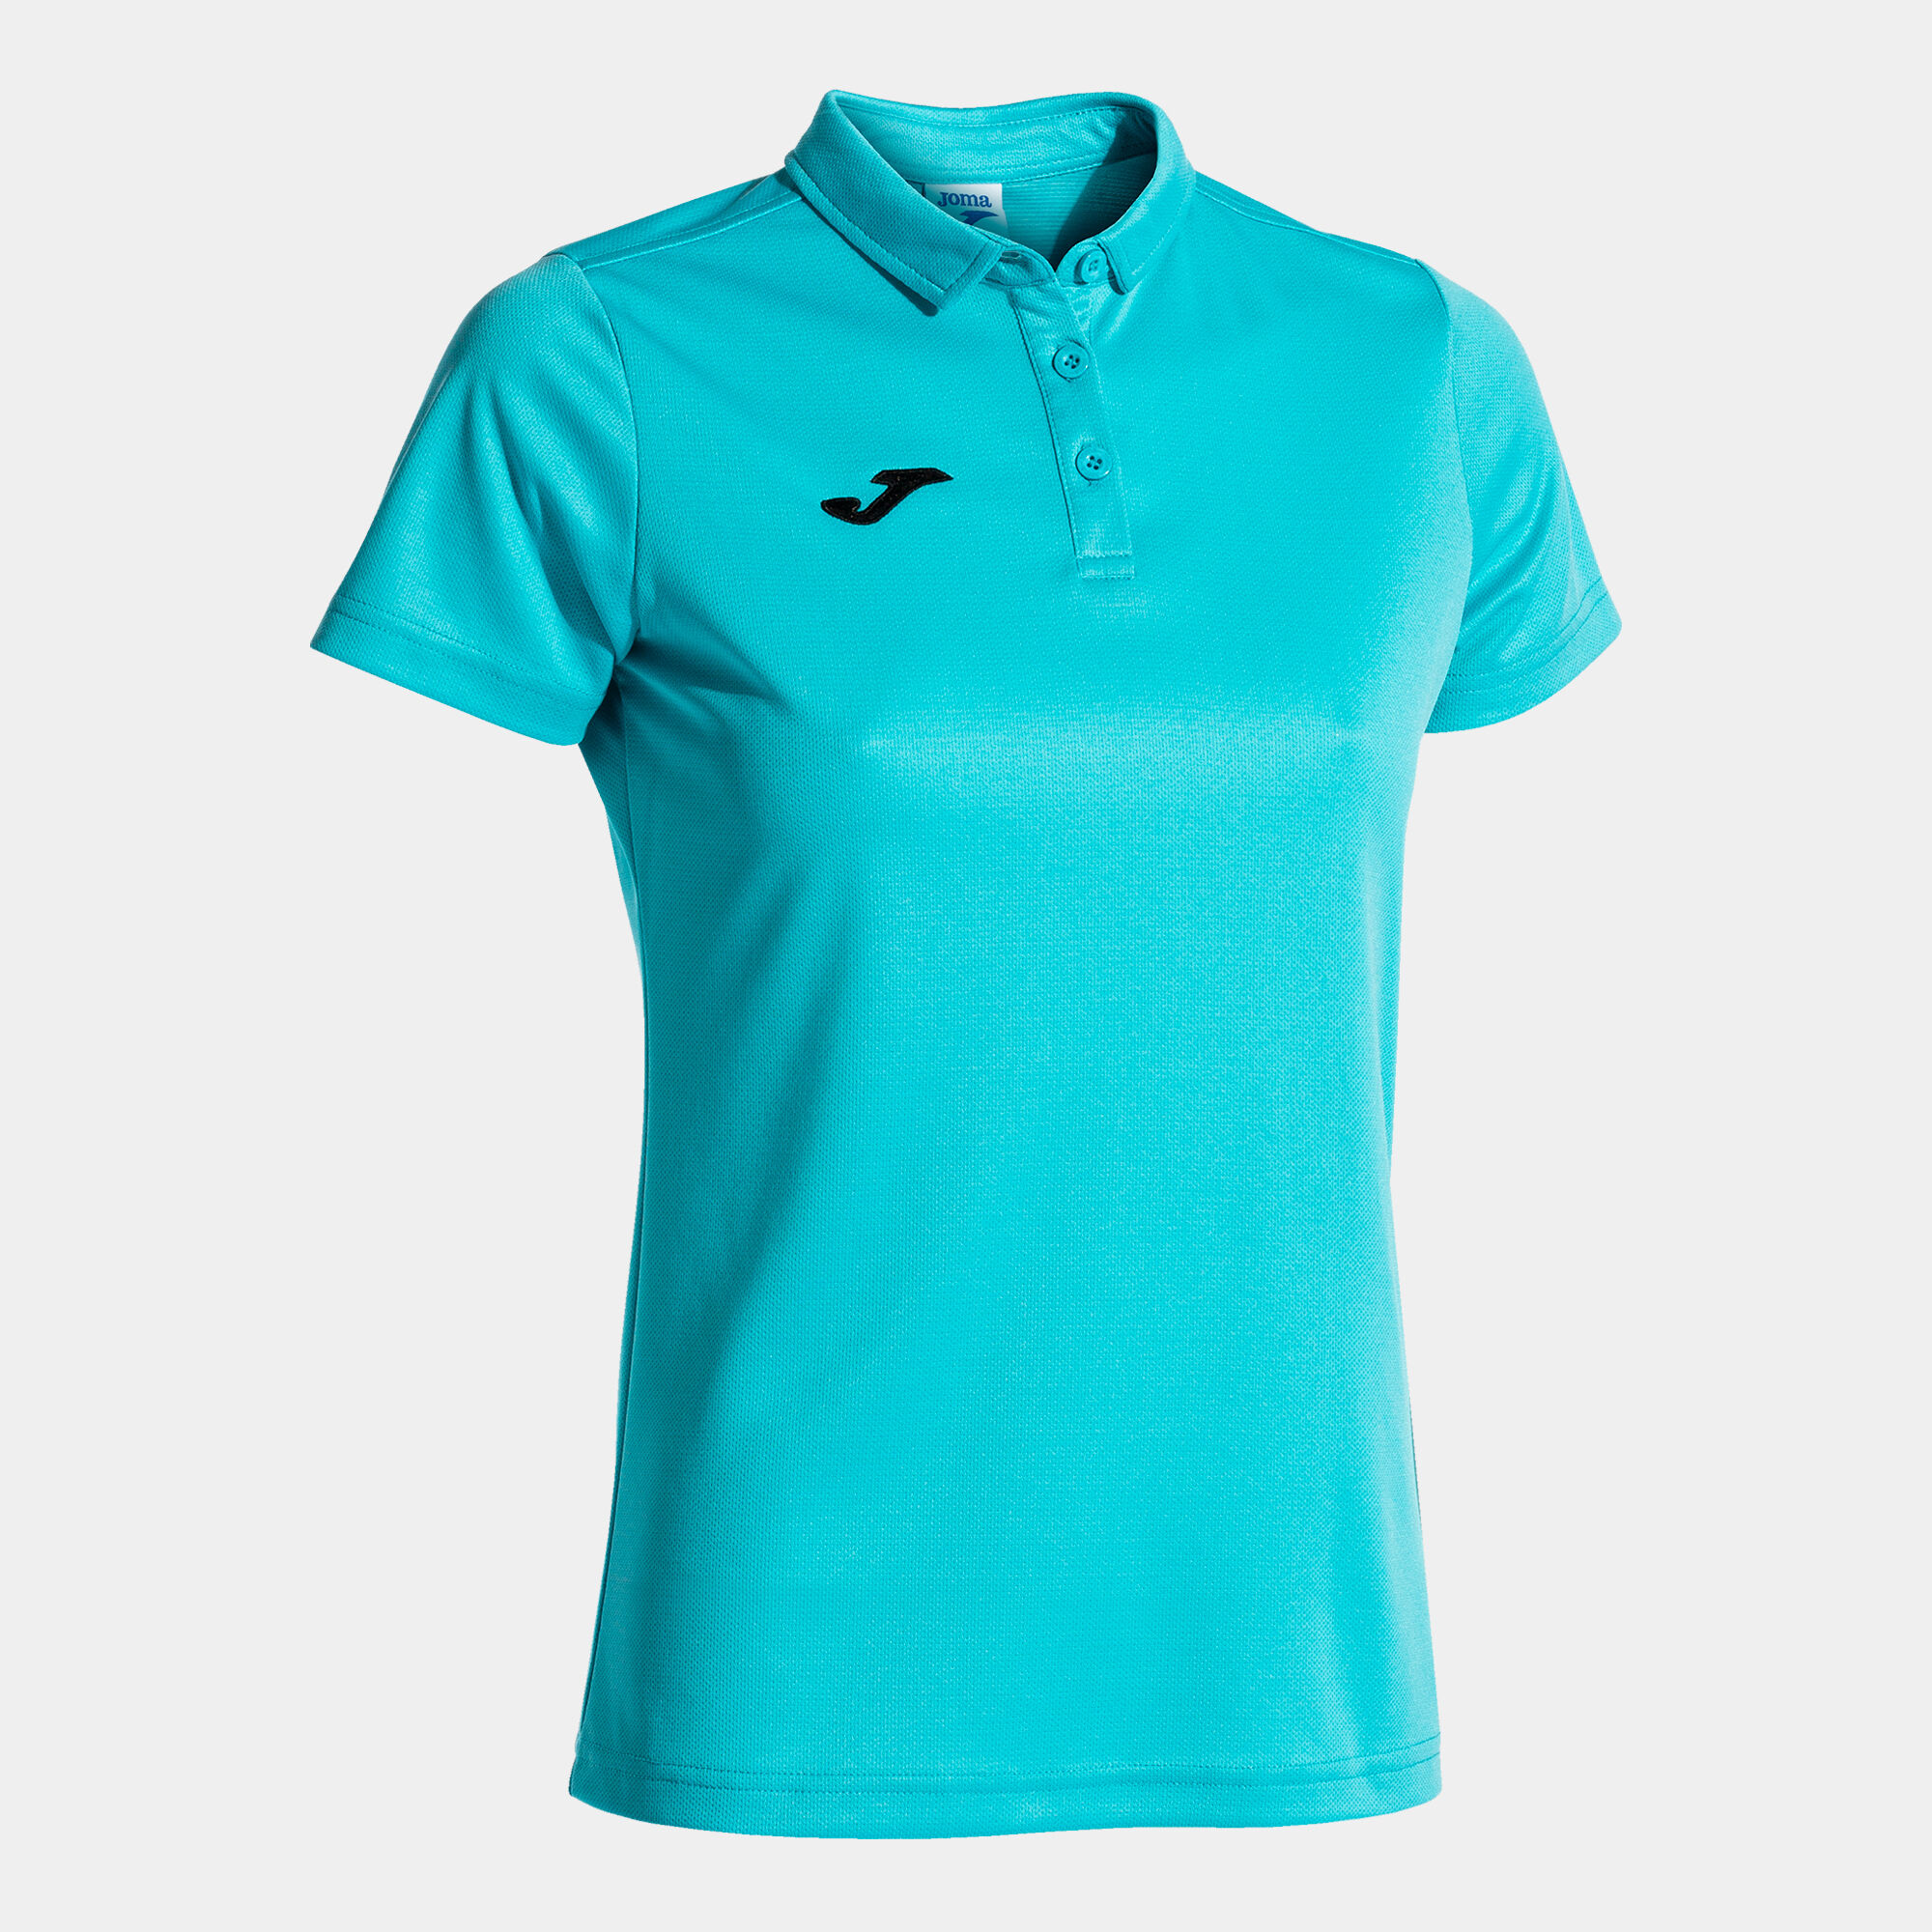 Polo shirt short-sleeve woman Hobby fluorescent turquoise